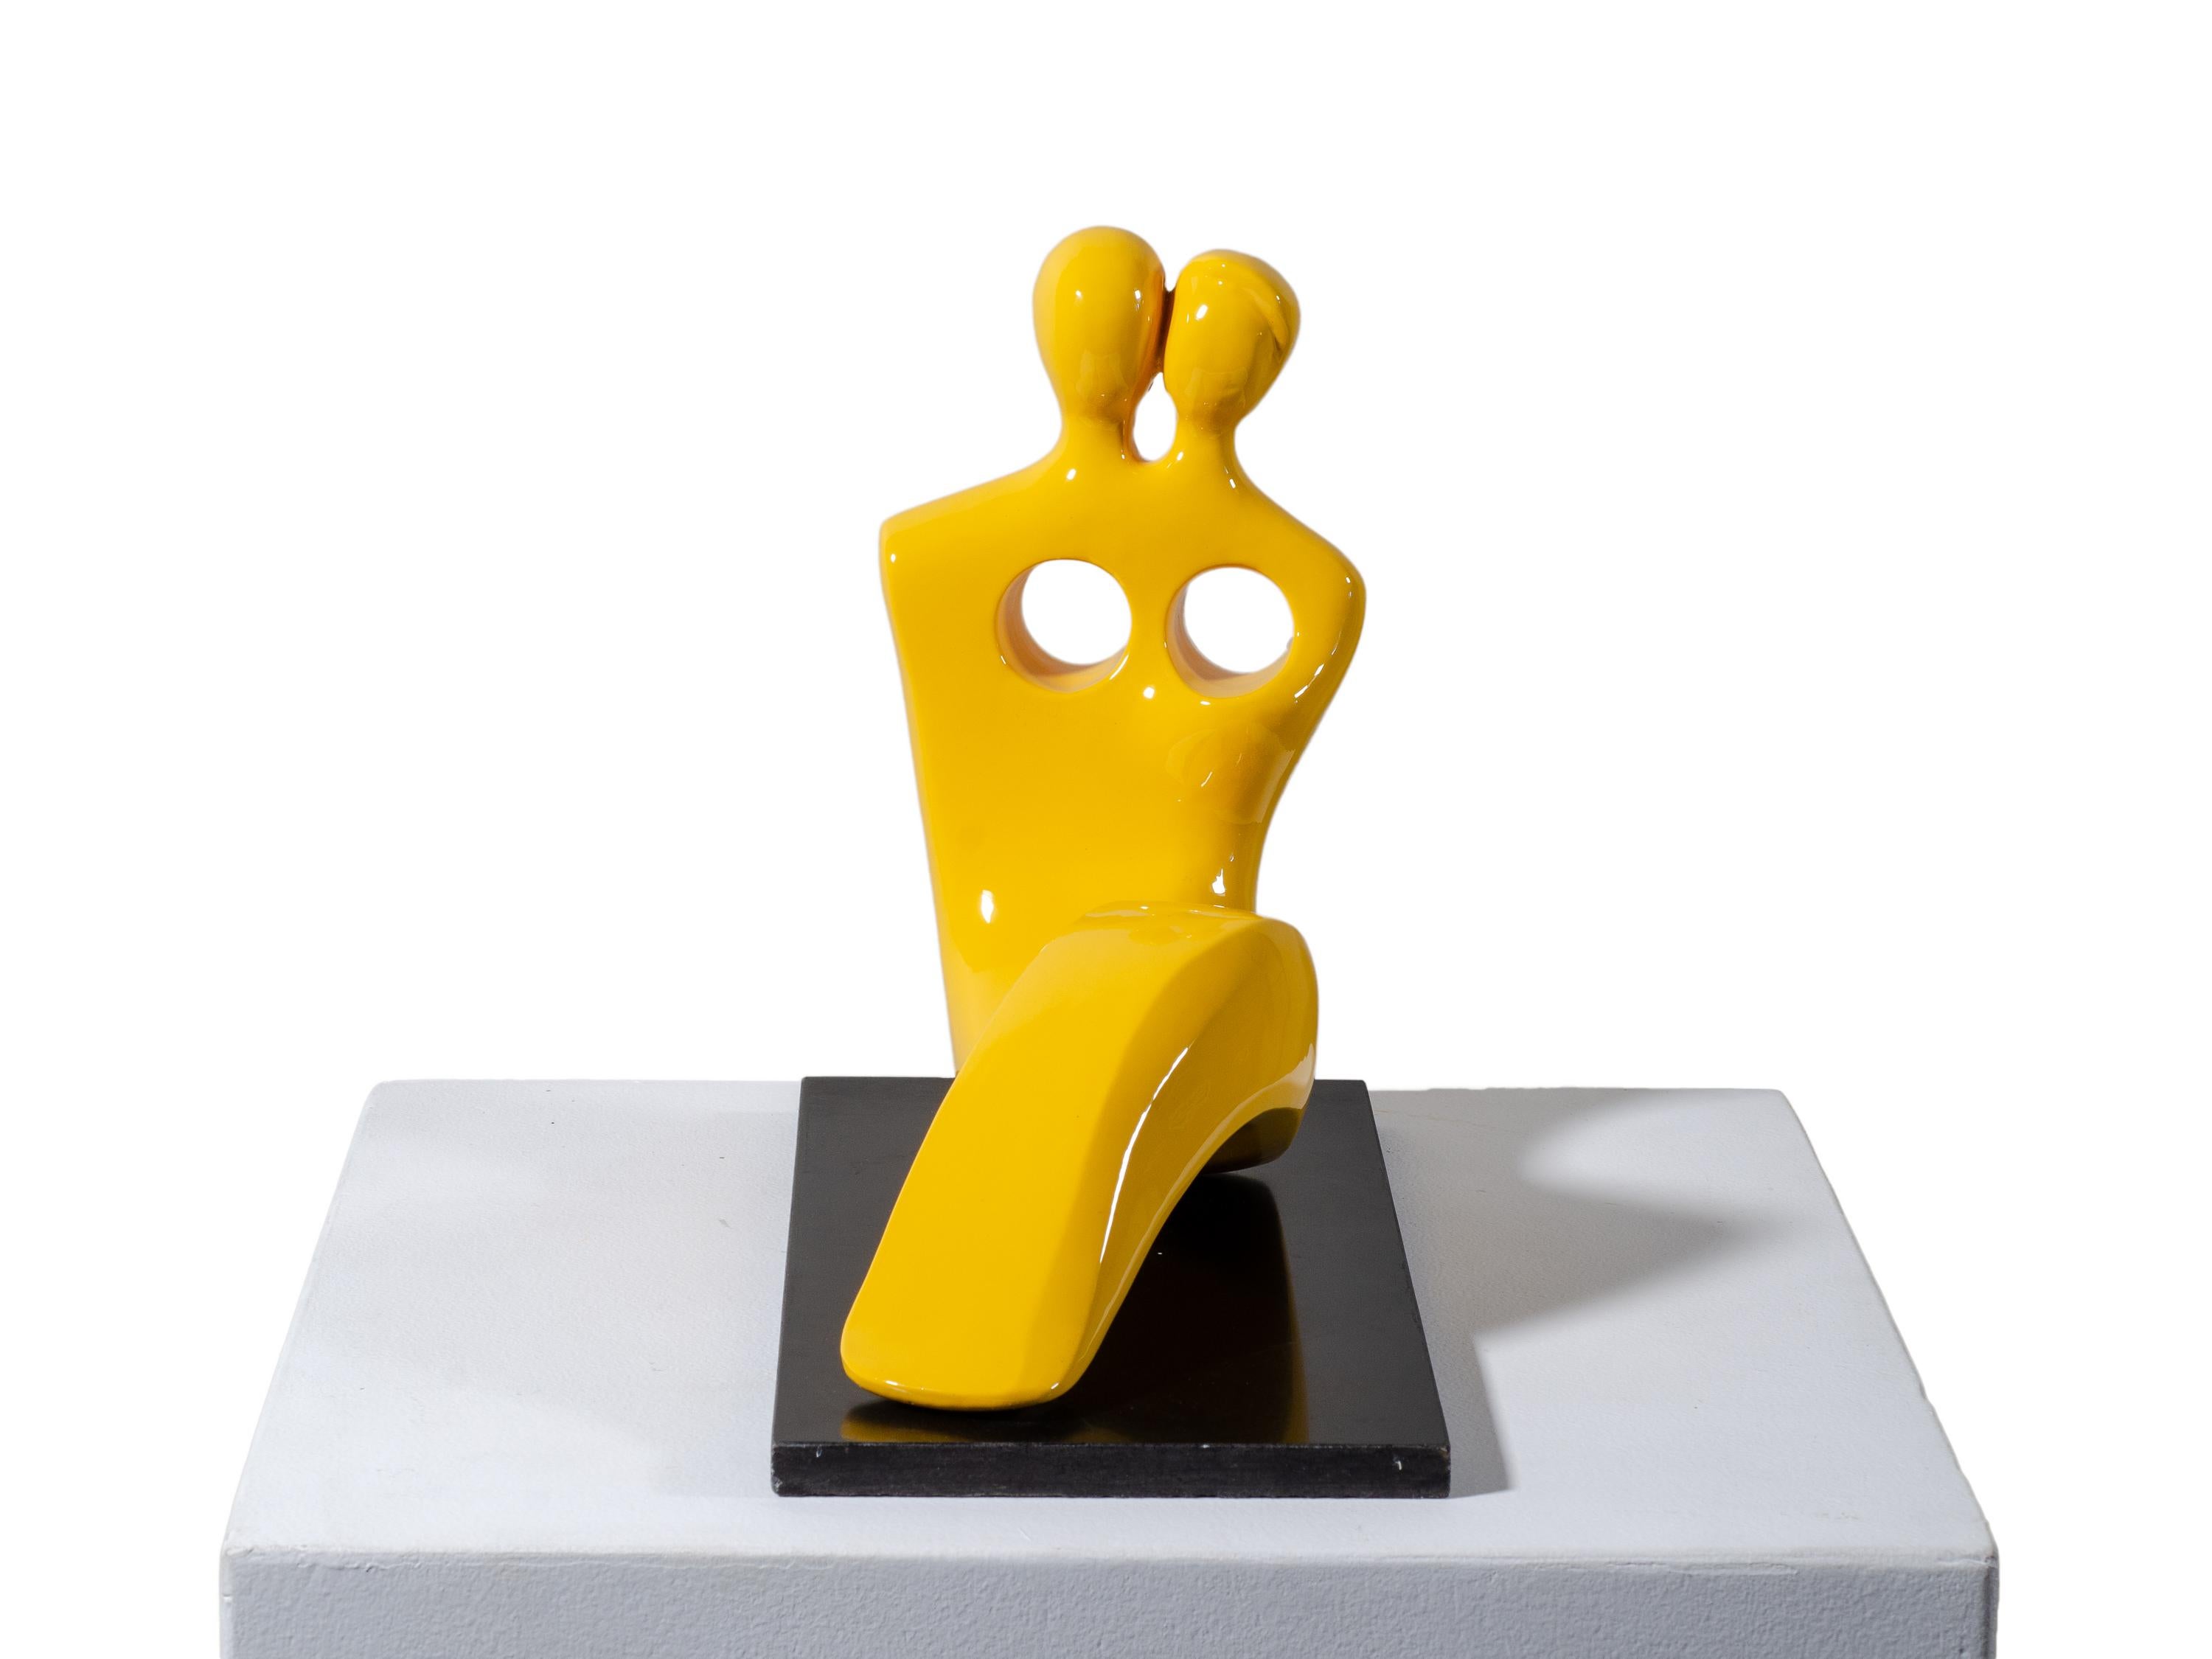 Soul Mates #3 (in yellow) When in love their souls and bodies fuse into one. - Sculpture by Beatriz Gerenstein